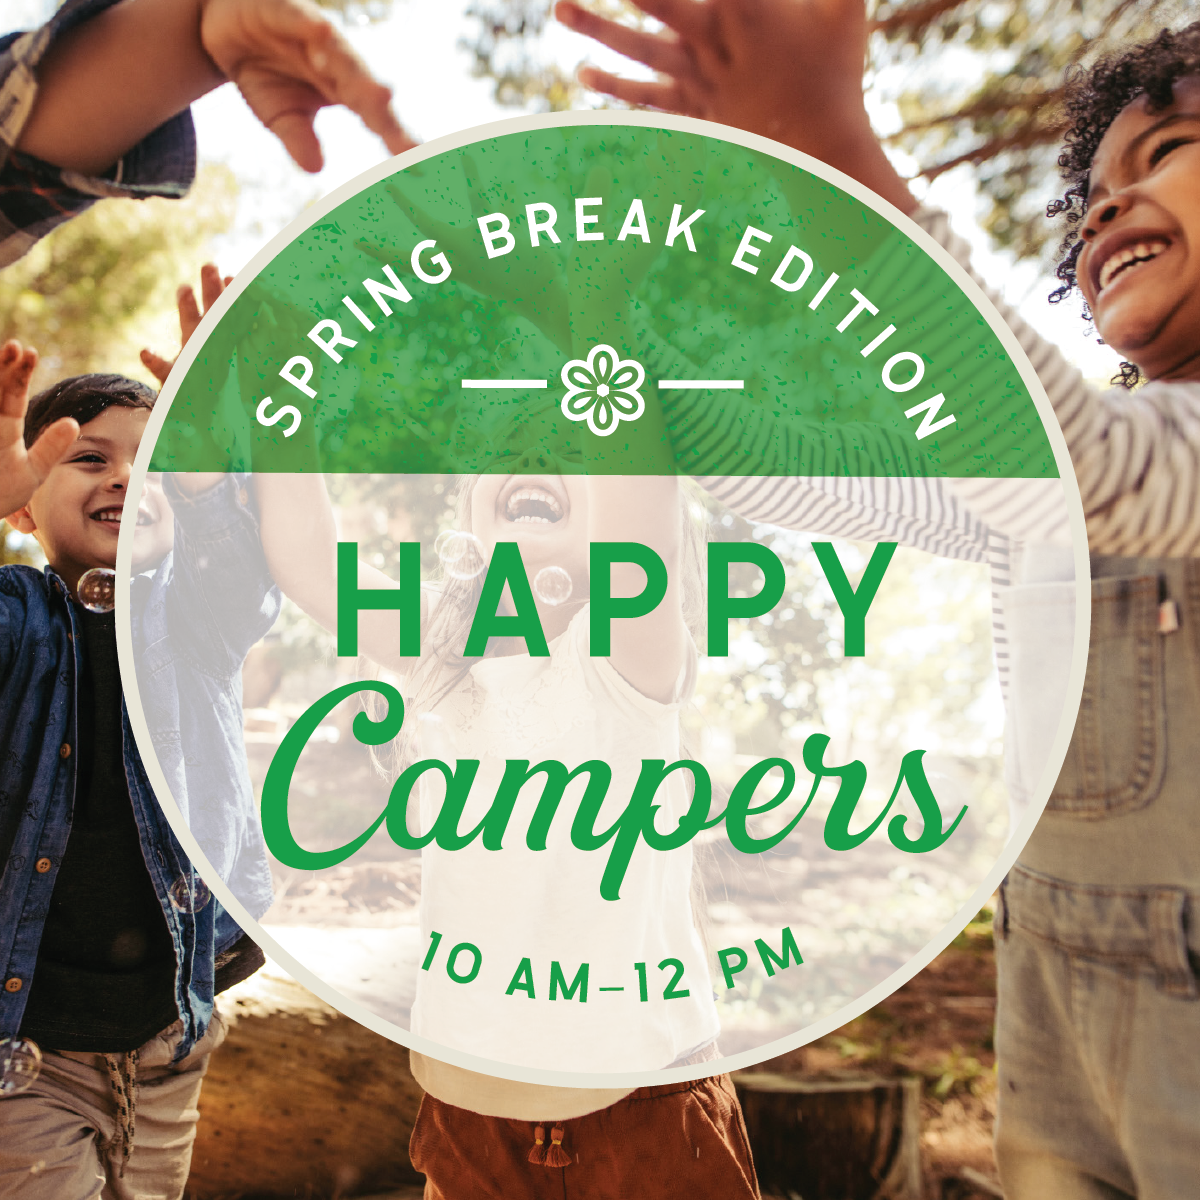 Happy Campers: Spring Break Edition Apr 4 - The Works